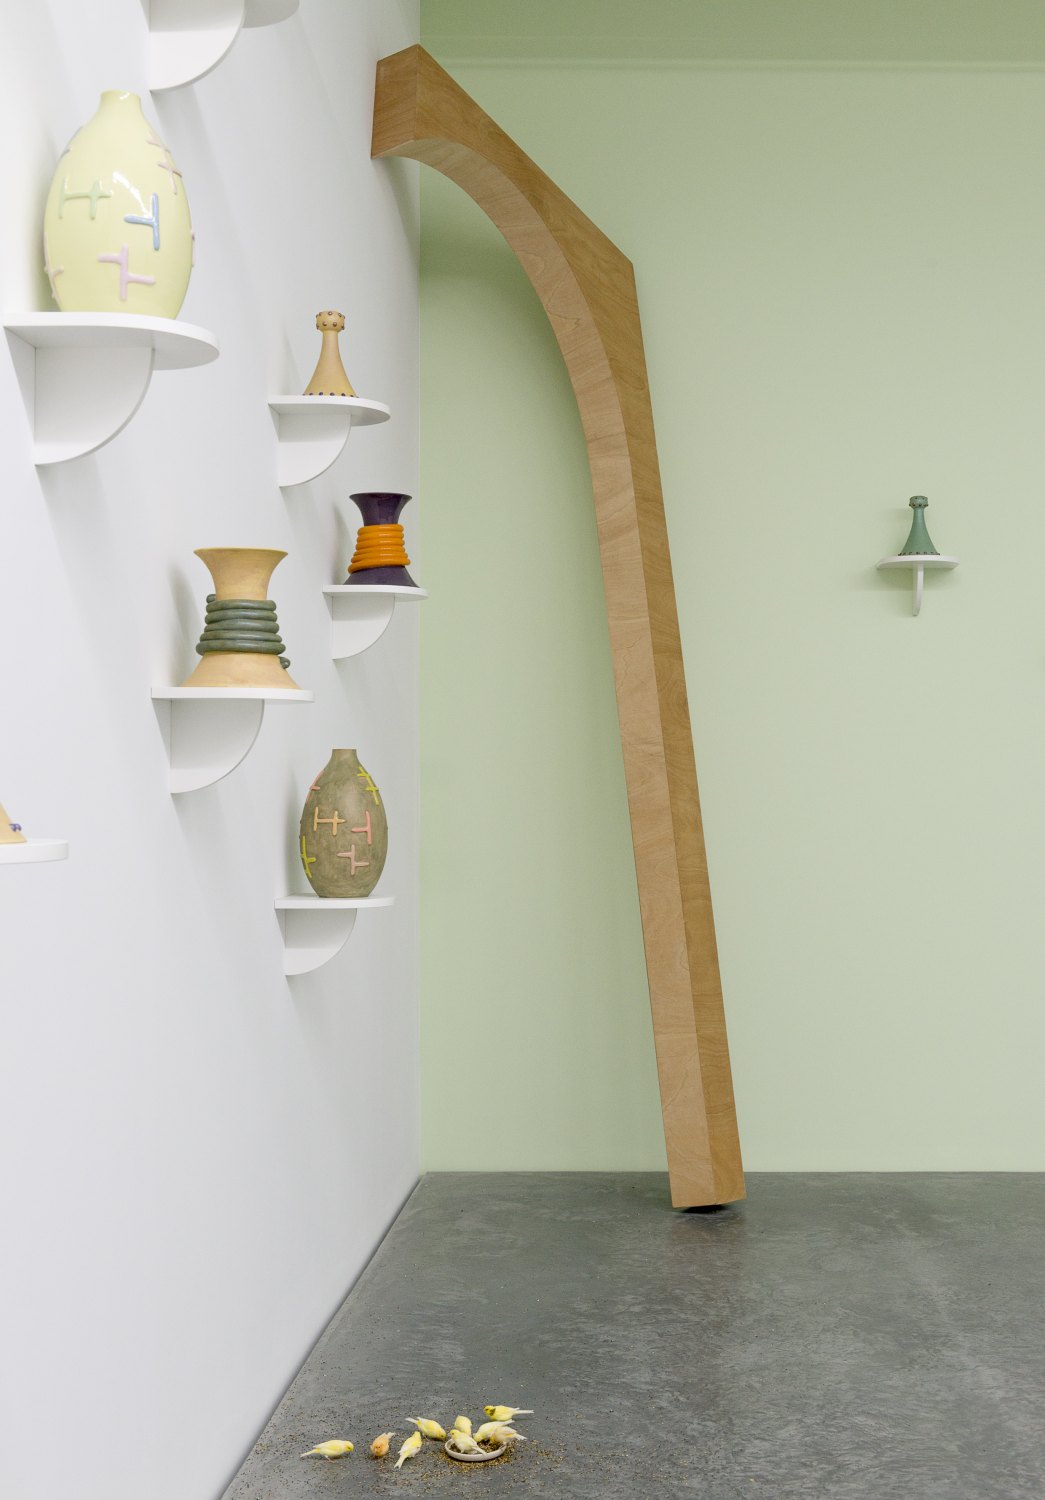 Marc Camille Chaimowicz, Forty and Forty Installation view, Galerie Neu, Berlin 2014